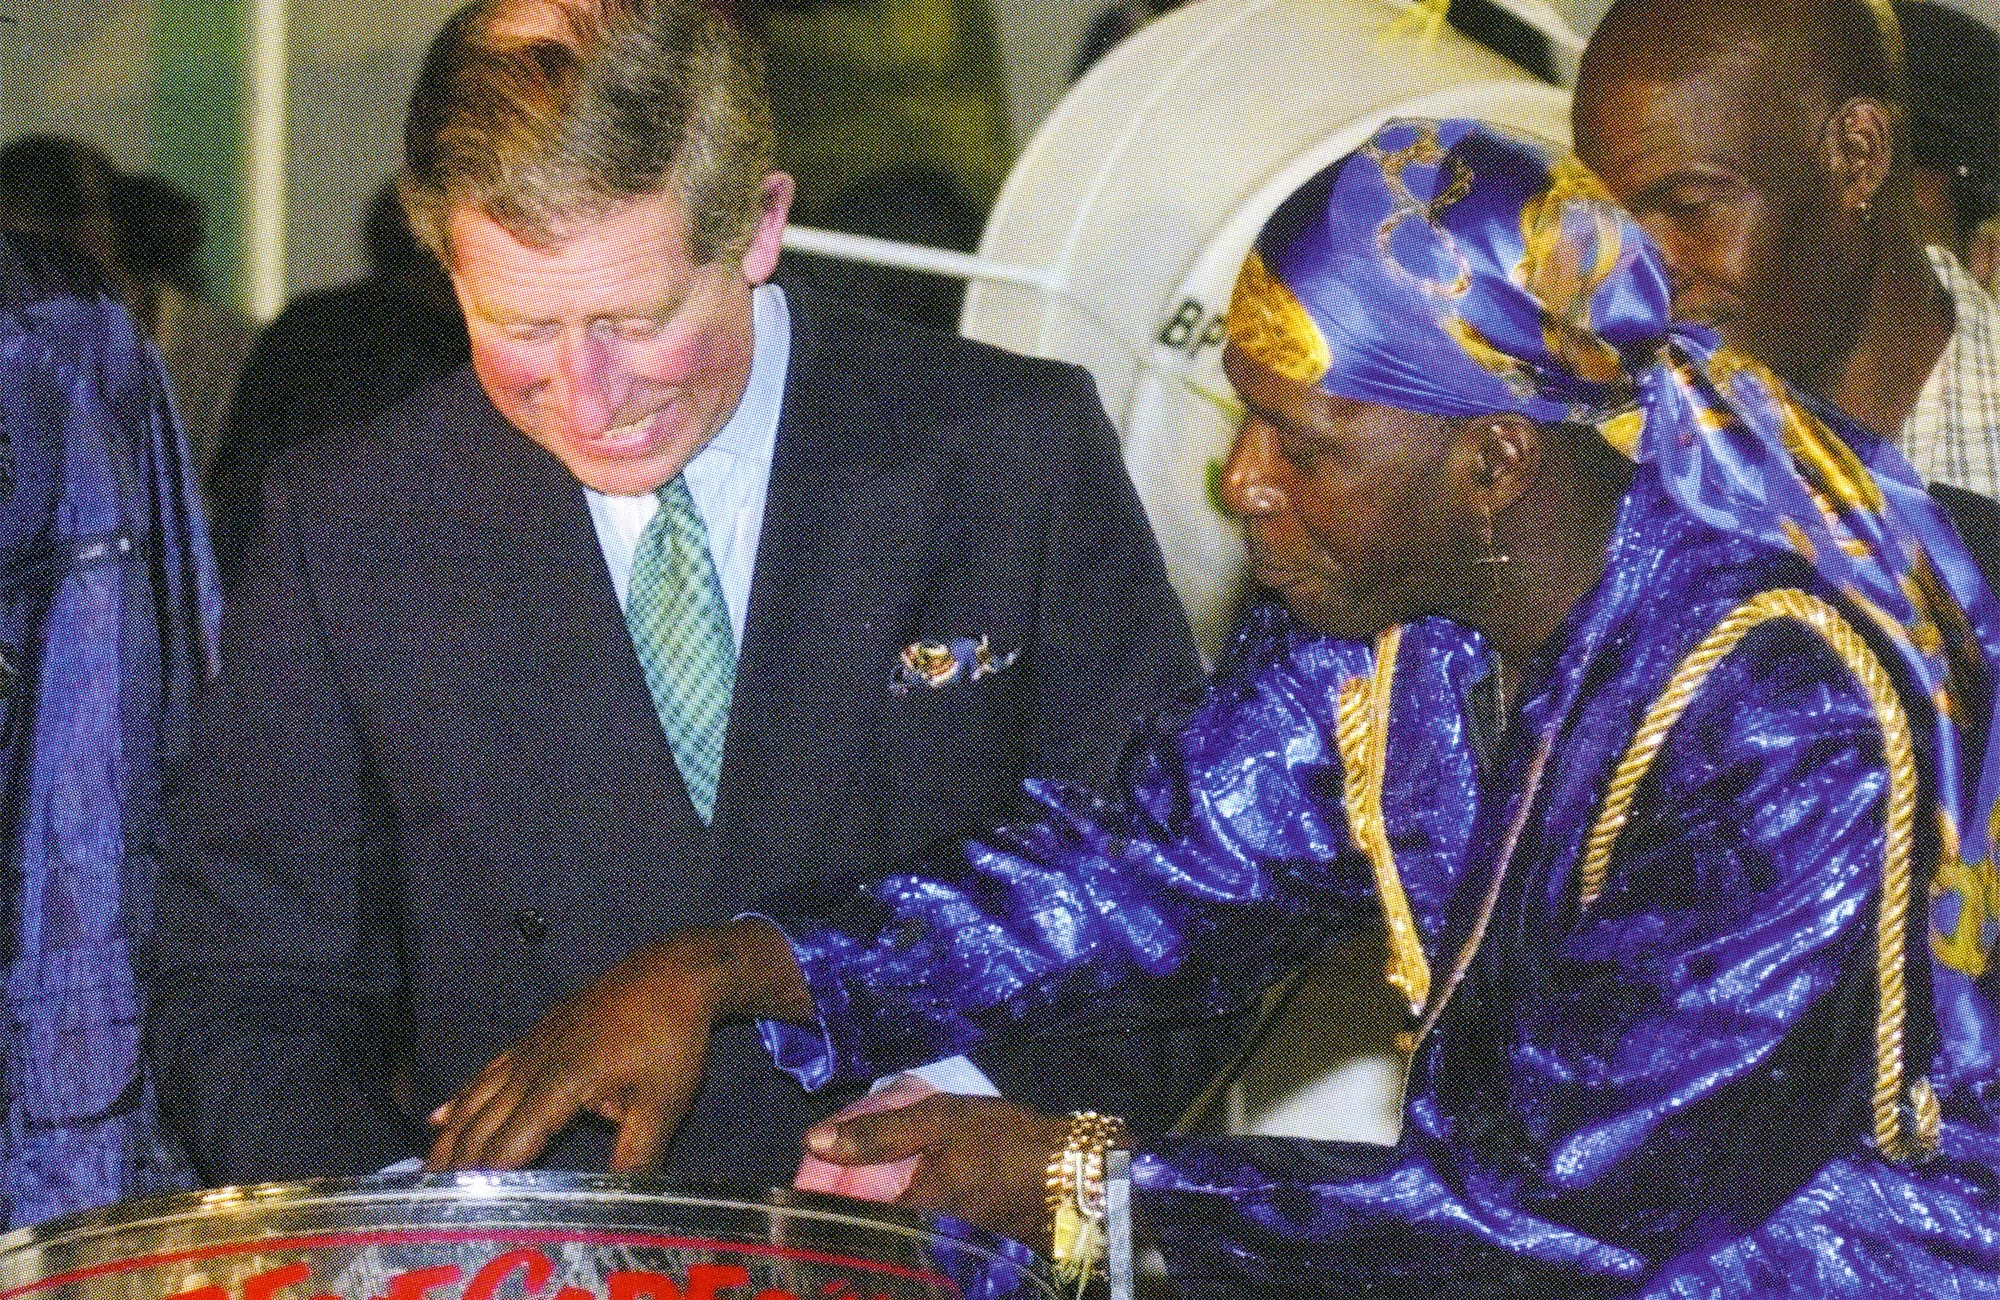 Prince Charles tries the steel drums with the Renegades band in Trinidad and Tobago